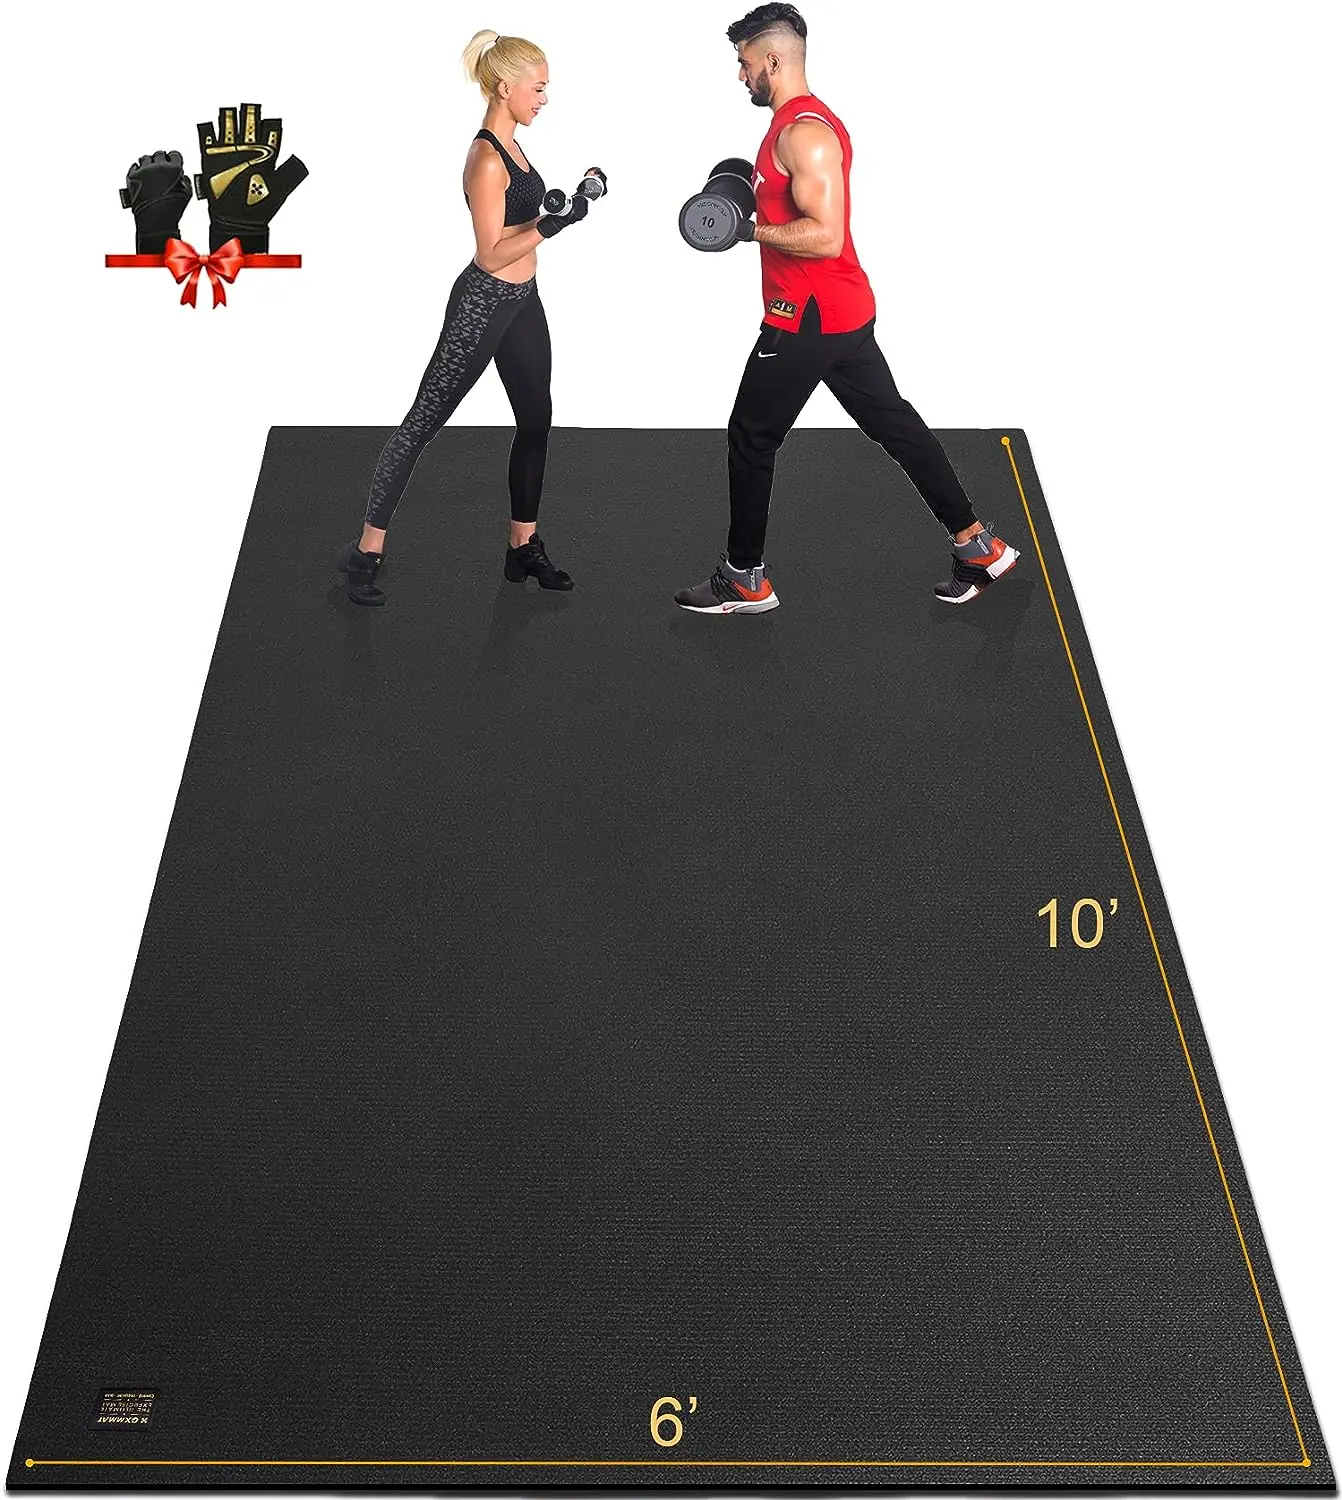 

Extra Large Exercise Mat 10'x6'x7mm, Ultra Durable Workout Mats for Home Gym Flooring, Shoe-Friendly Non-Slip Cardio Mat